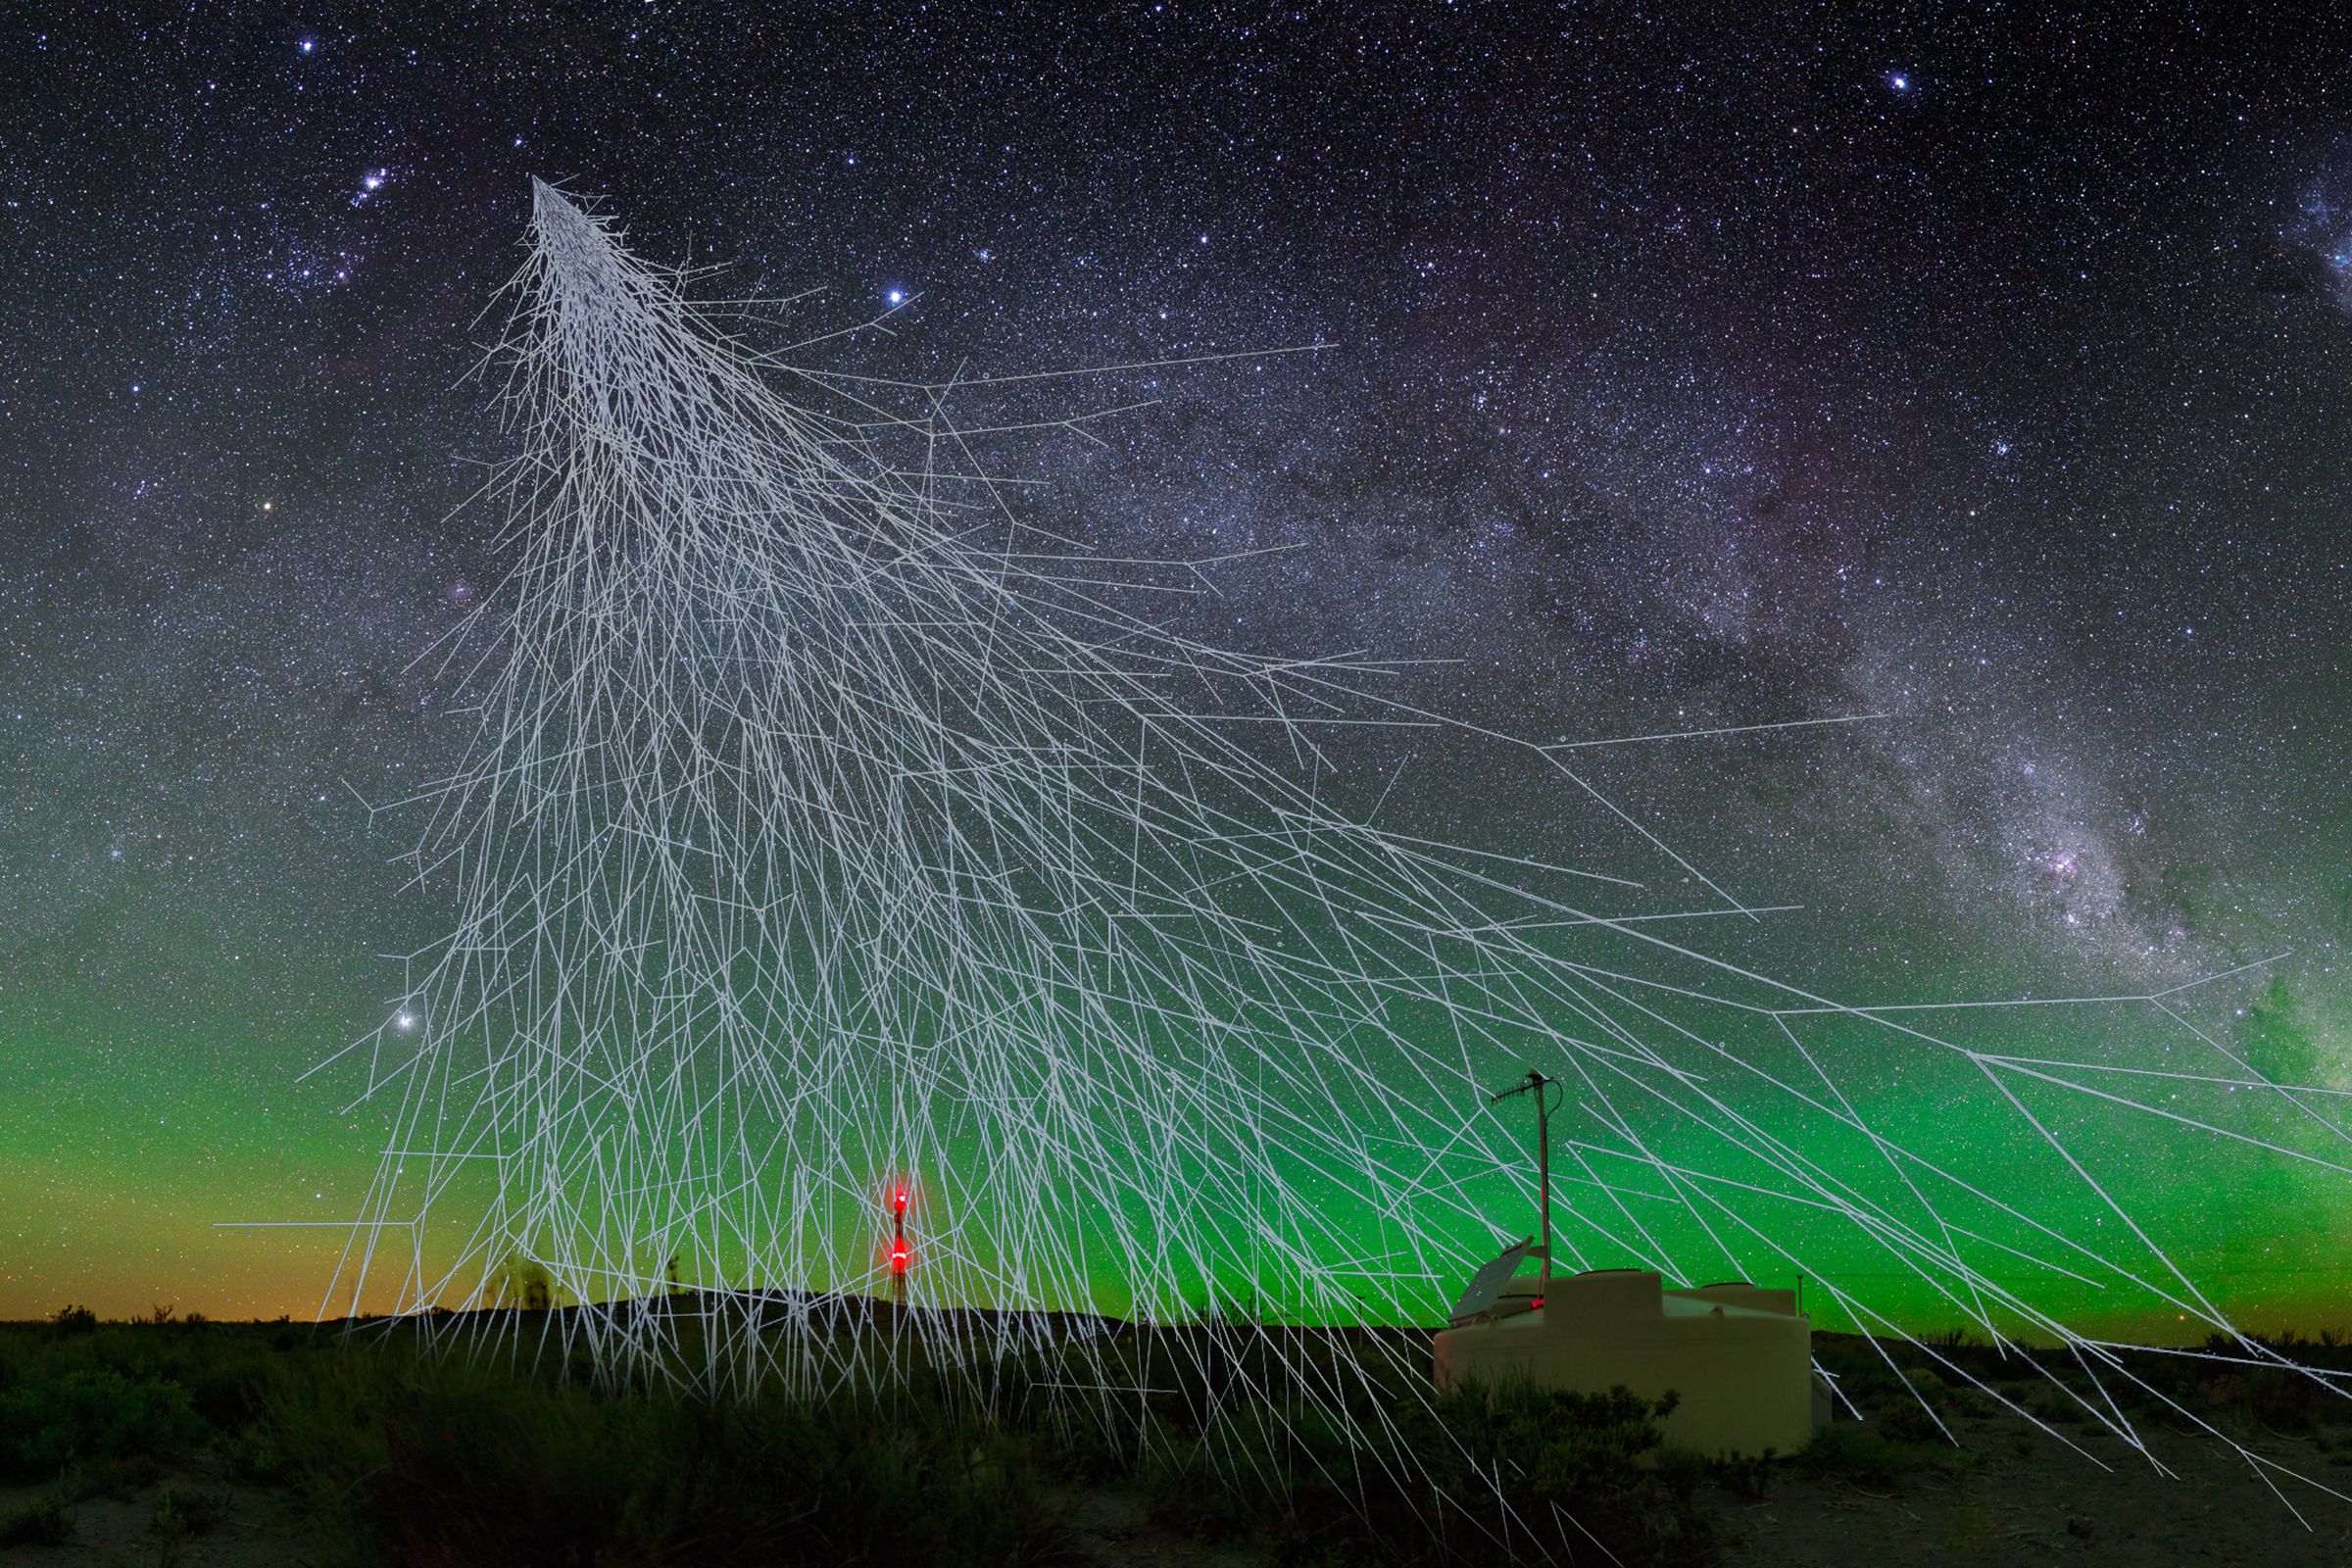 A rendering of cosmic rays showering particles onto Earth.